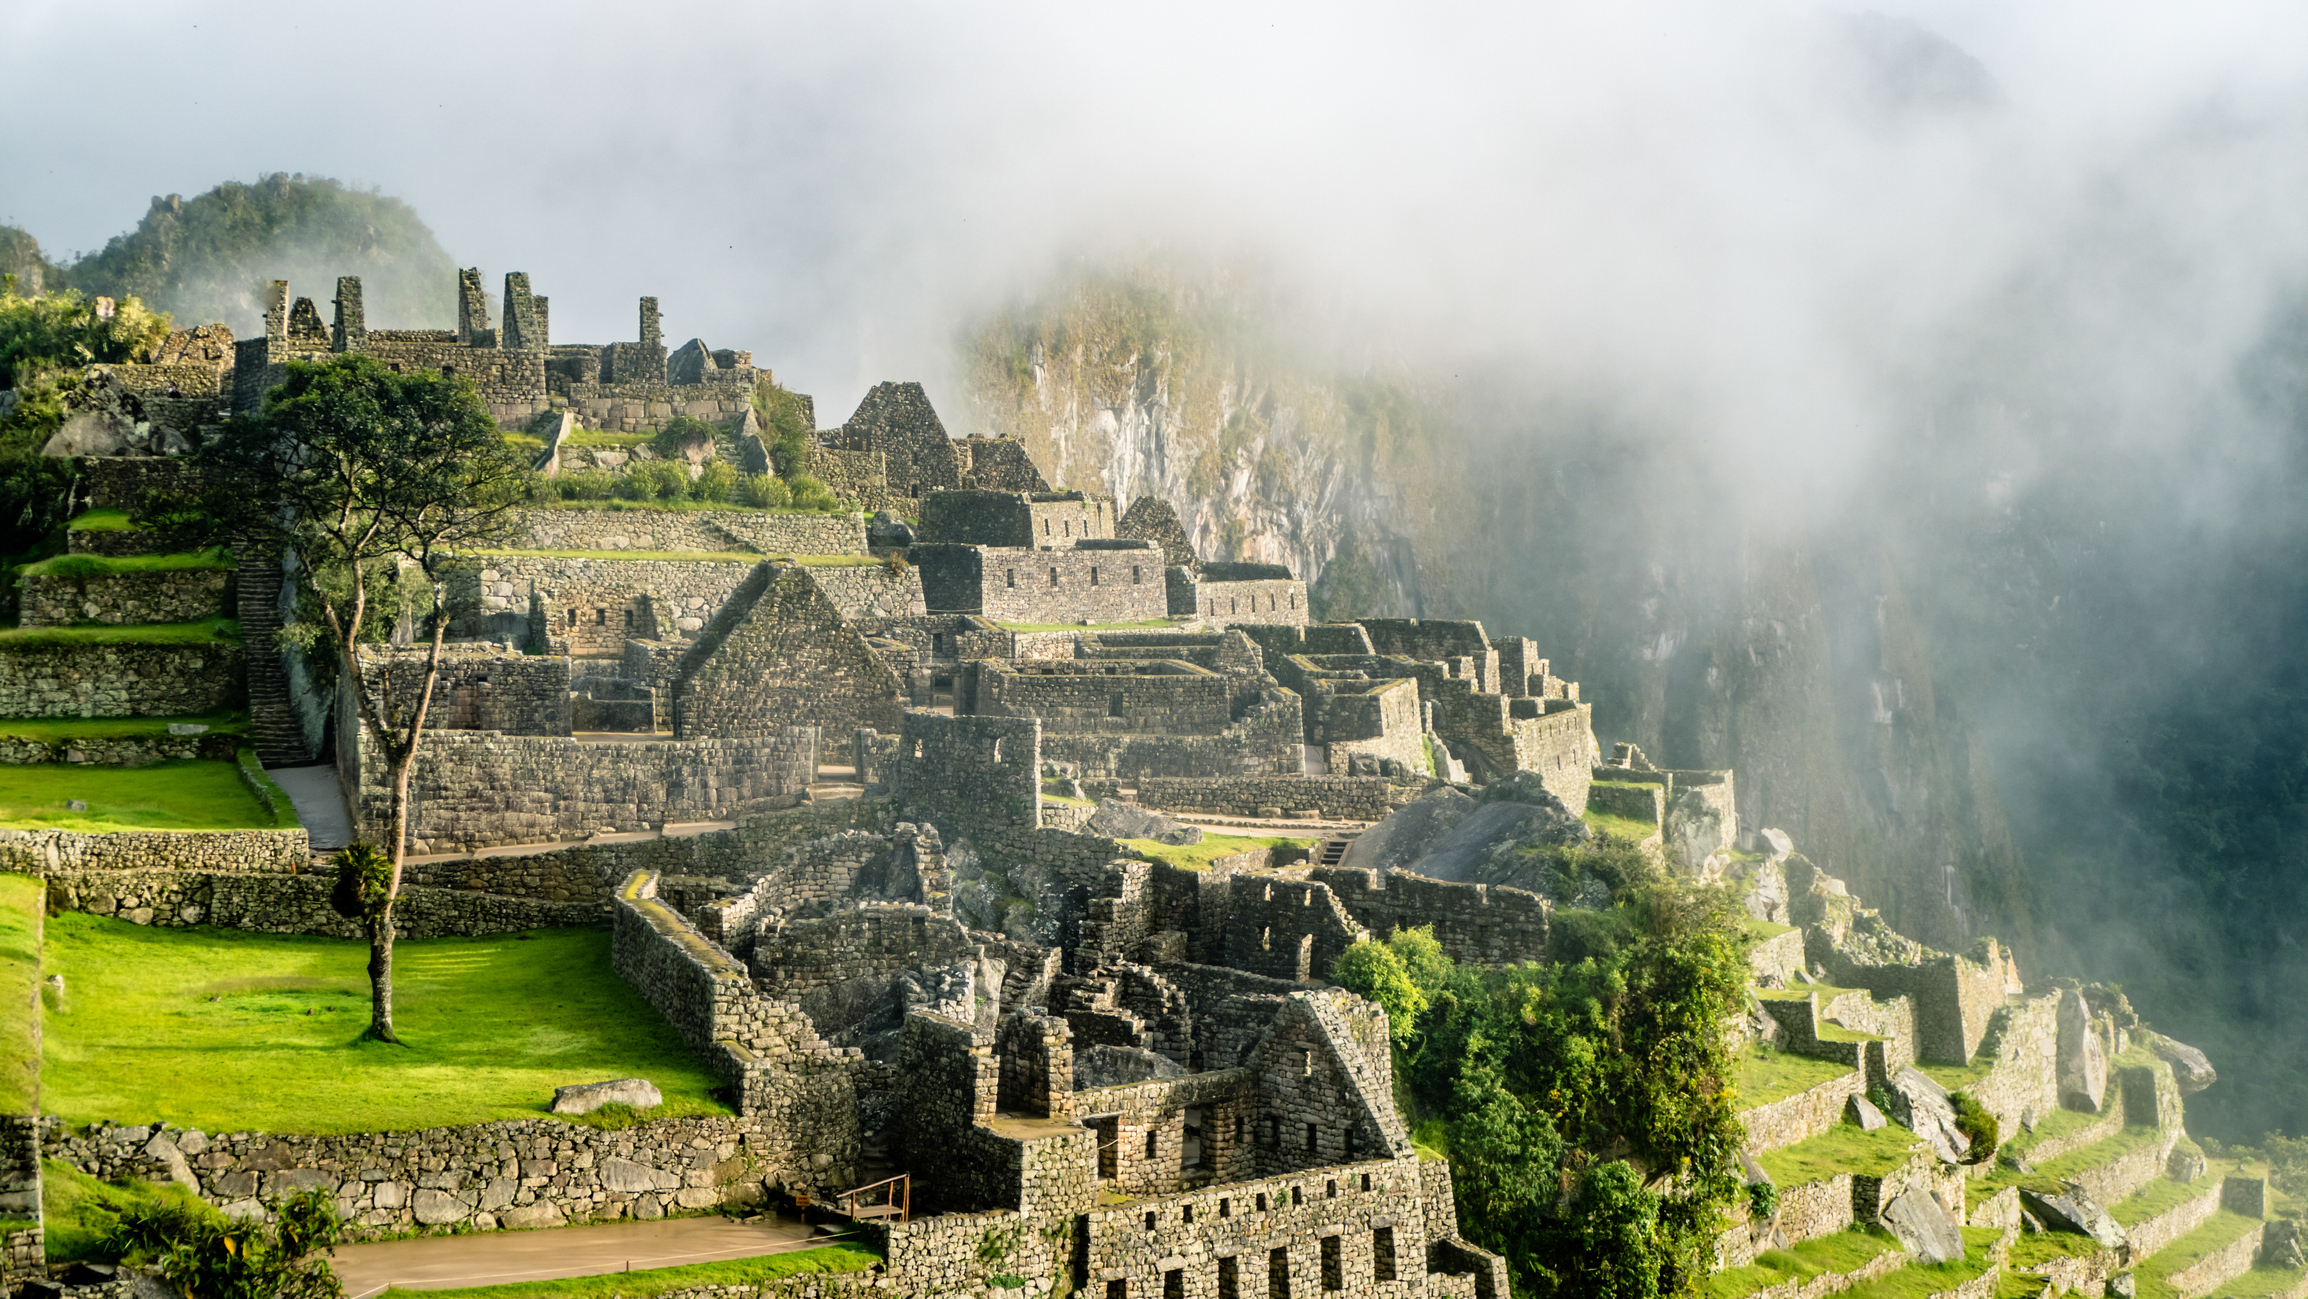 Ancient Machu Picchu ruins with terraces and stone structures amid mountain fog